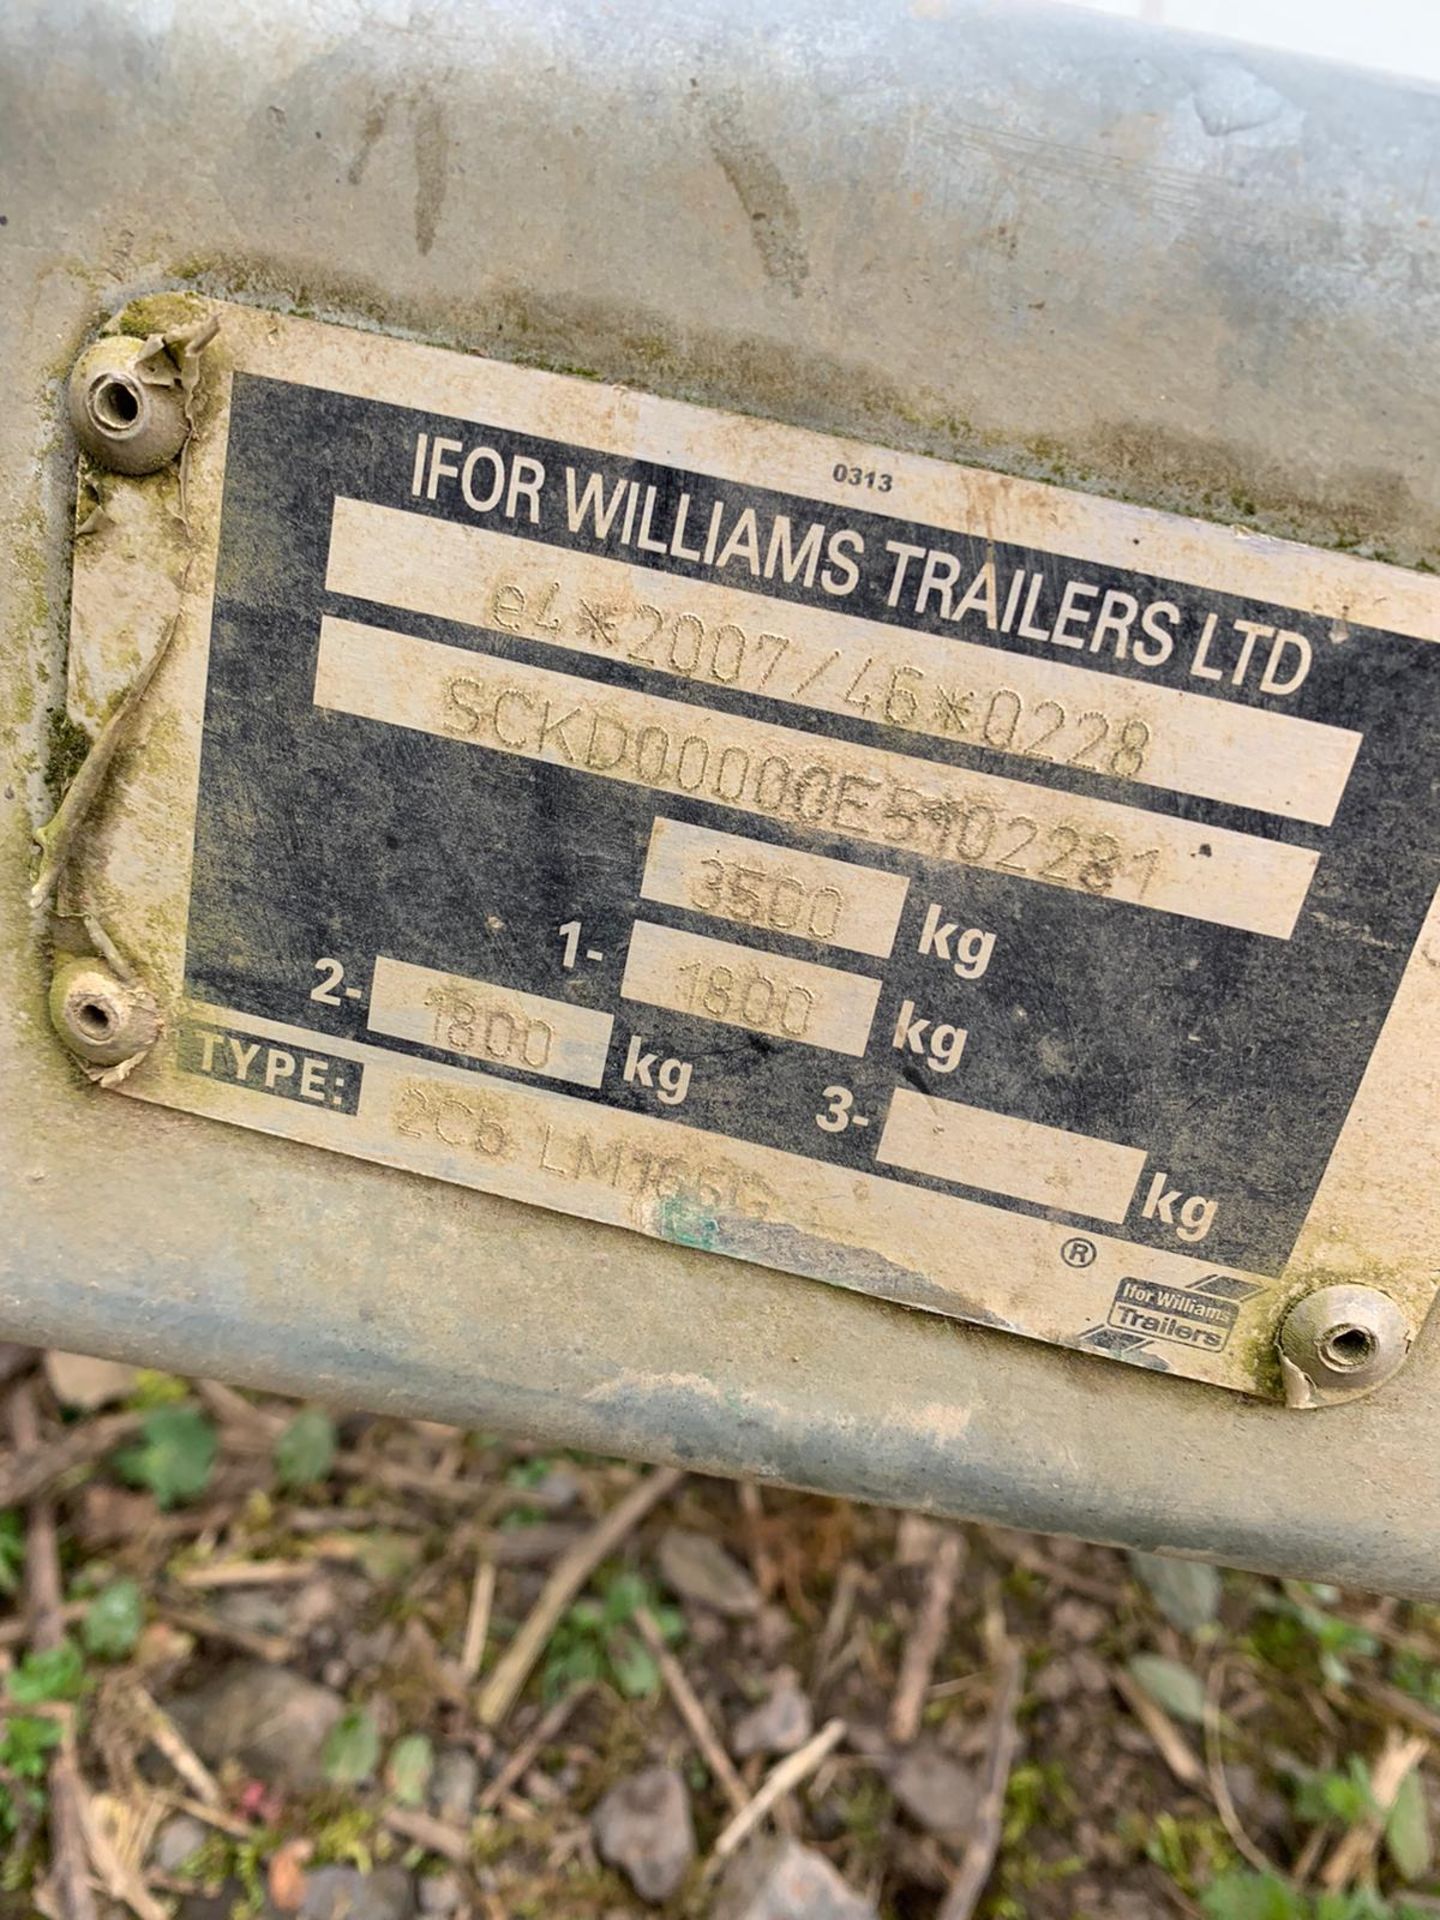 Ifor Williams LM166G 4.8m Twin Axle Commercial Trailer c/w Drop Sides - Image 7 of 7